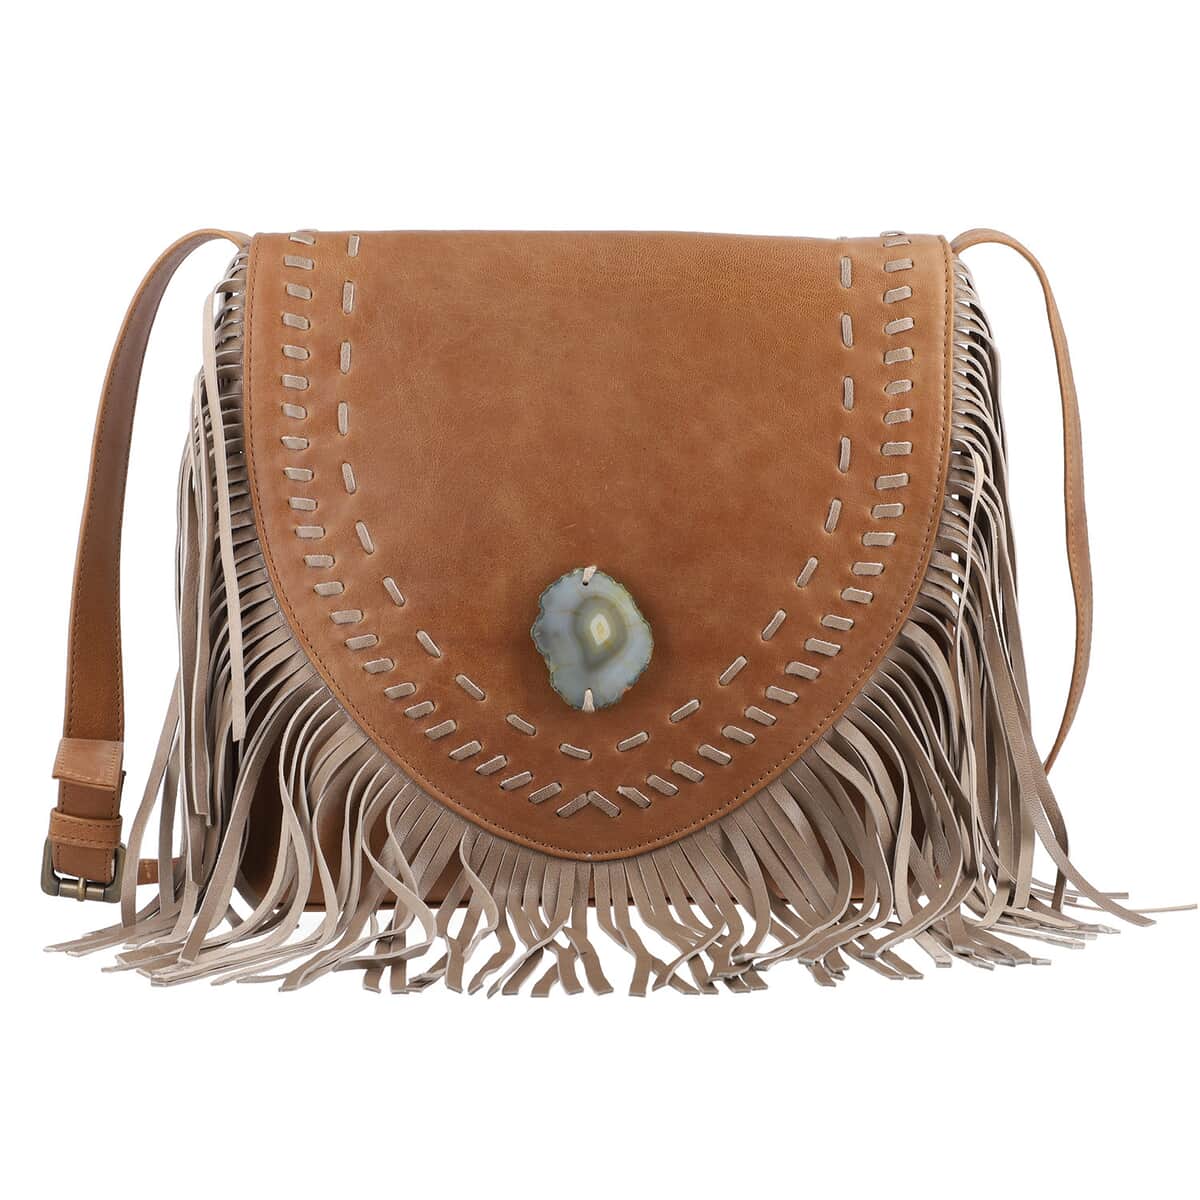 "100% Genuine Leather Crossbody Bag with Agate Stone and Matching Fringes SIZE: 14(L)x3(W)x10.5(H) Inches COLOR: Gray" image number 0